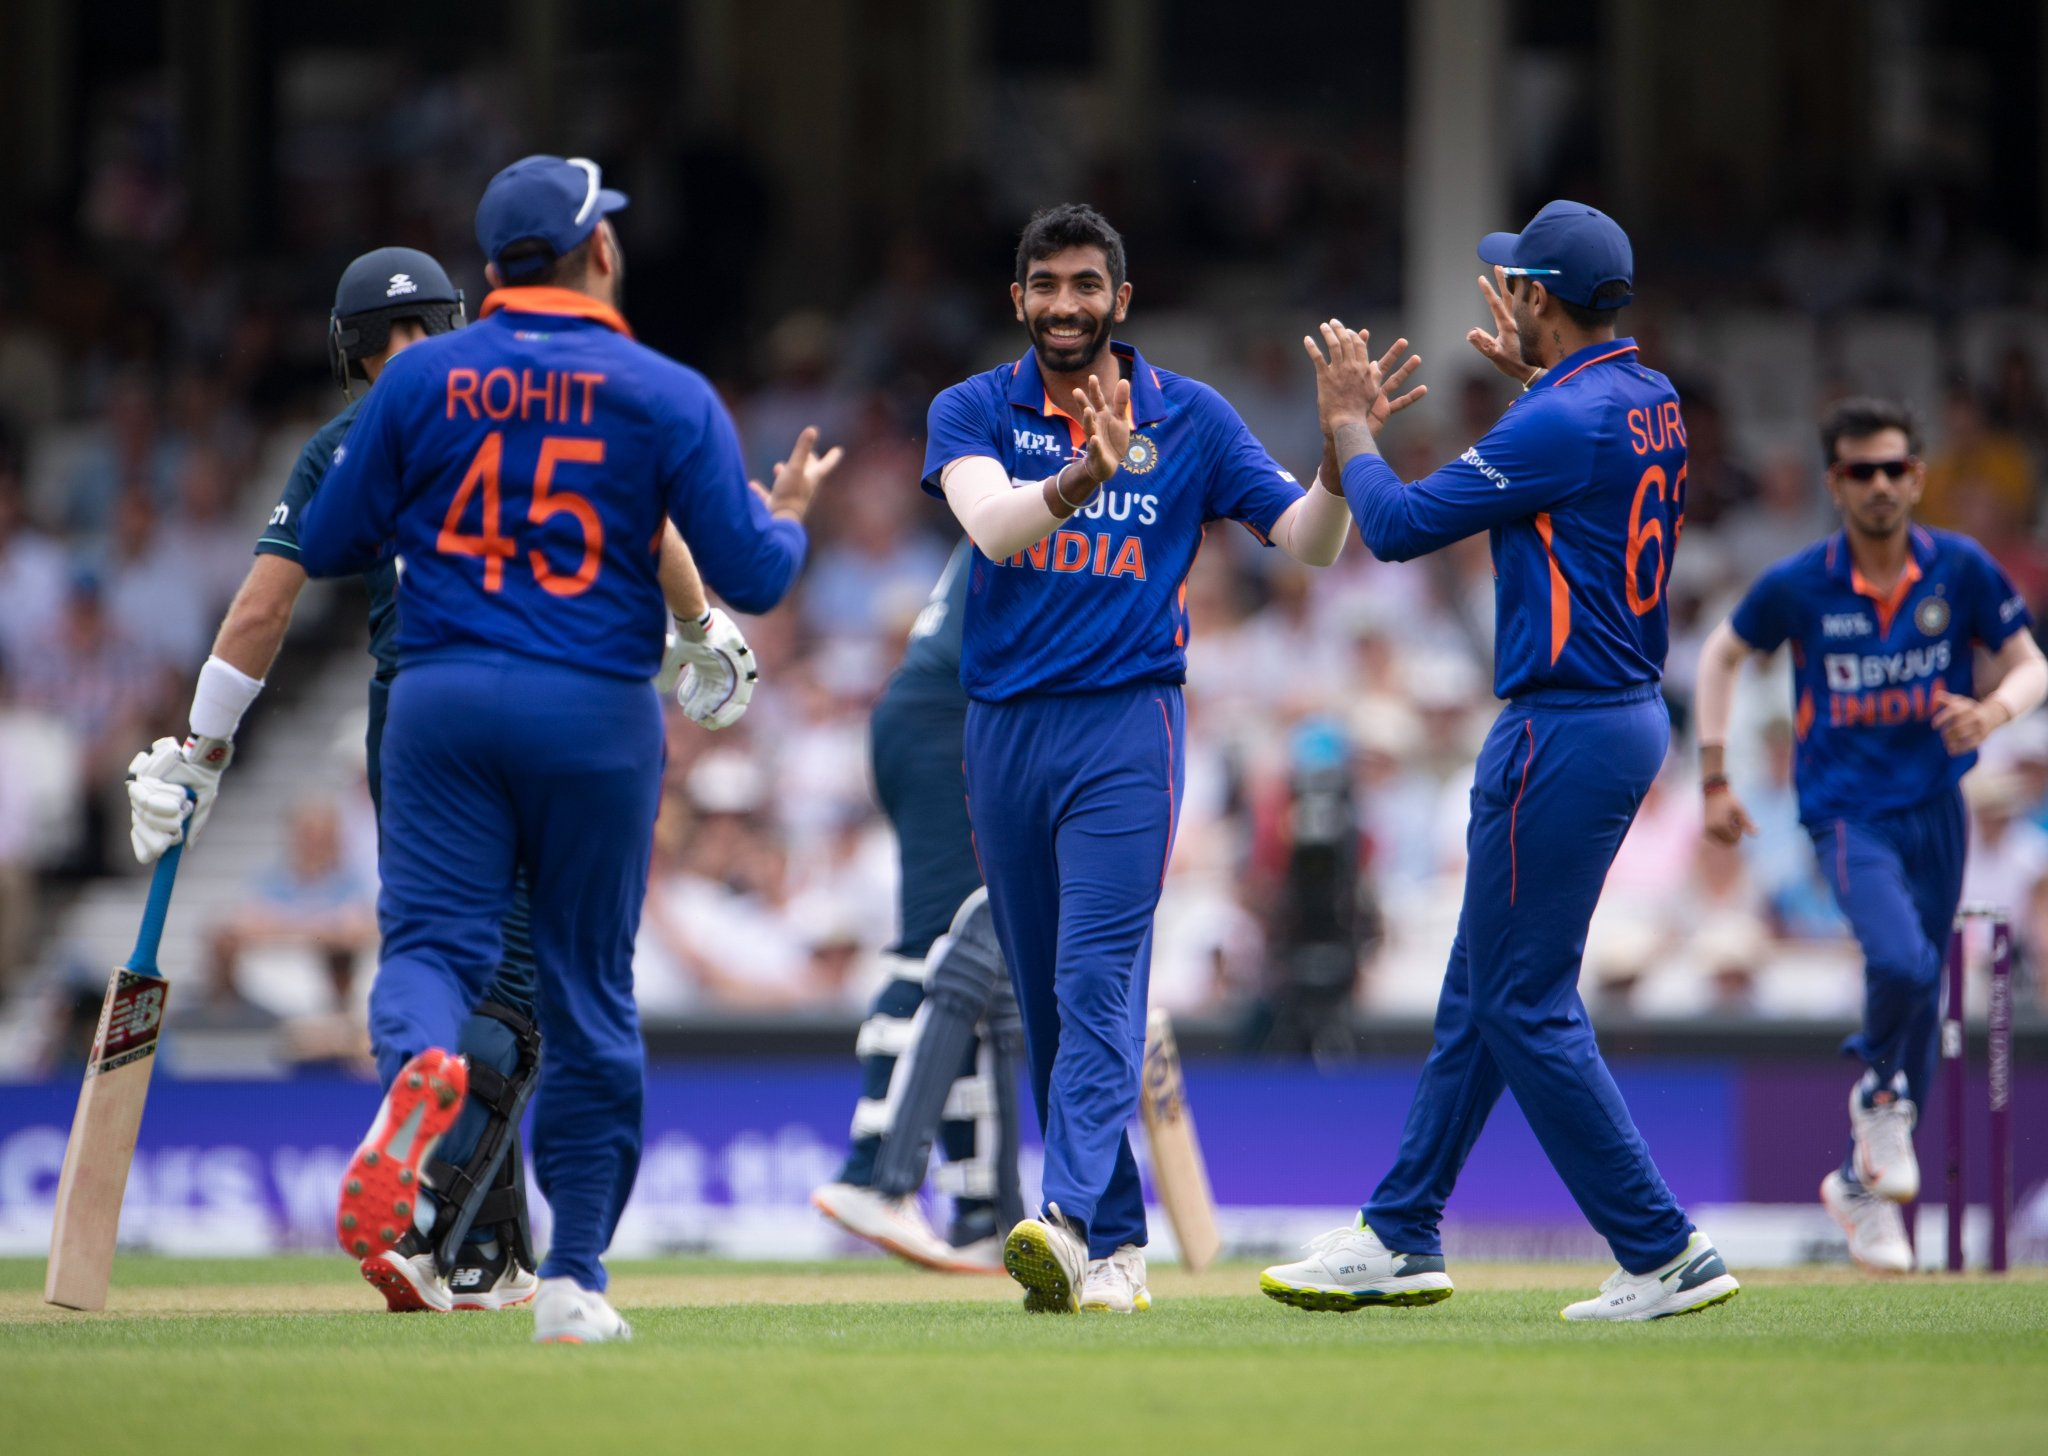 Jasprit Bumrah registers his career best figures of 6/19 in first ODI against England